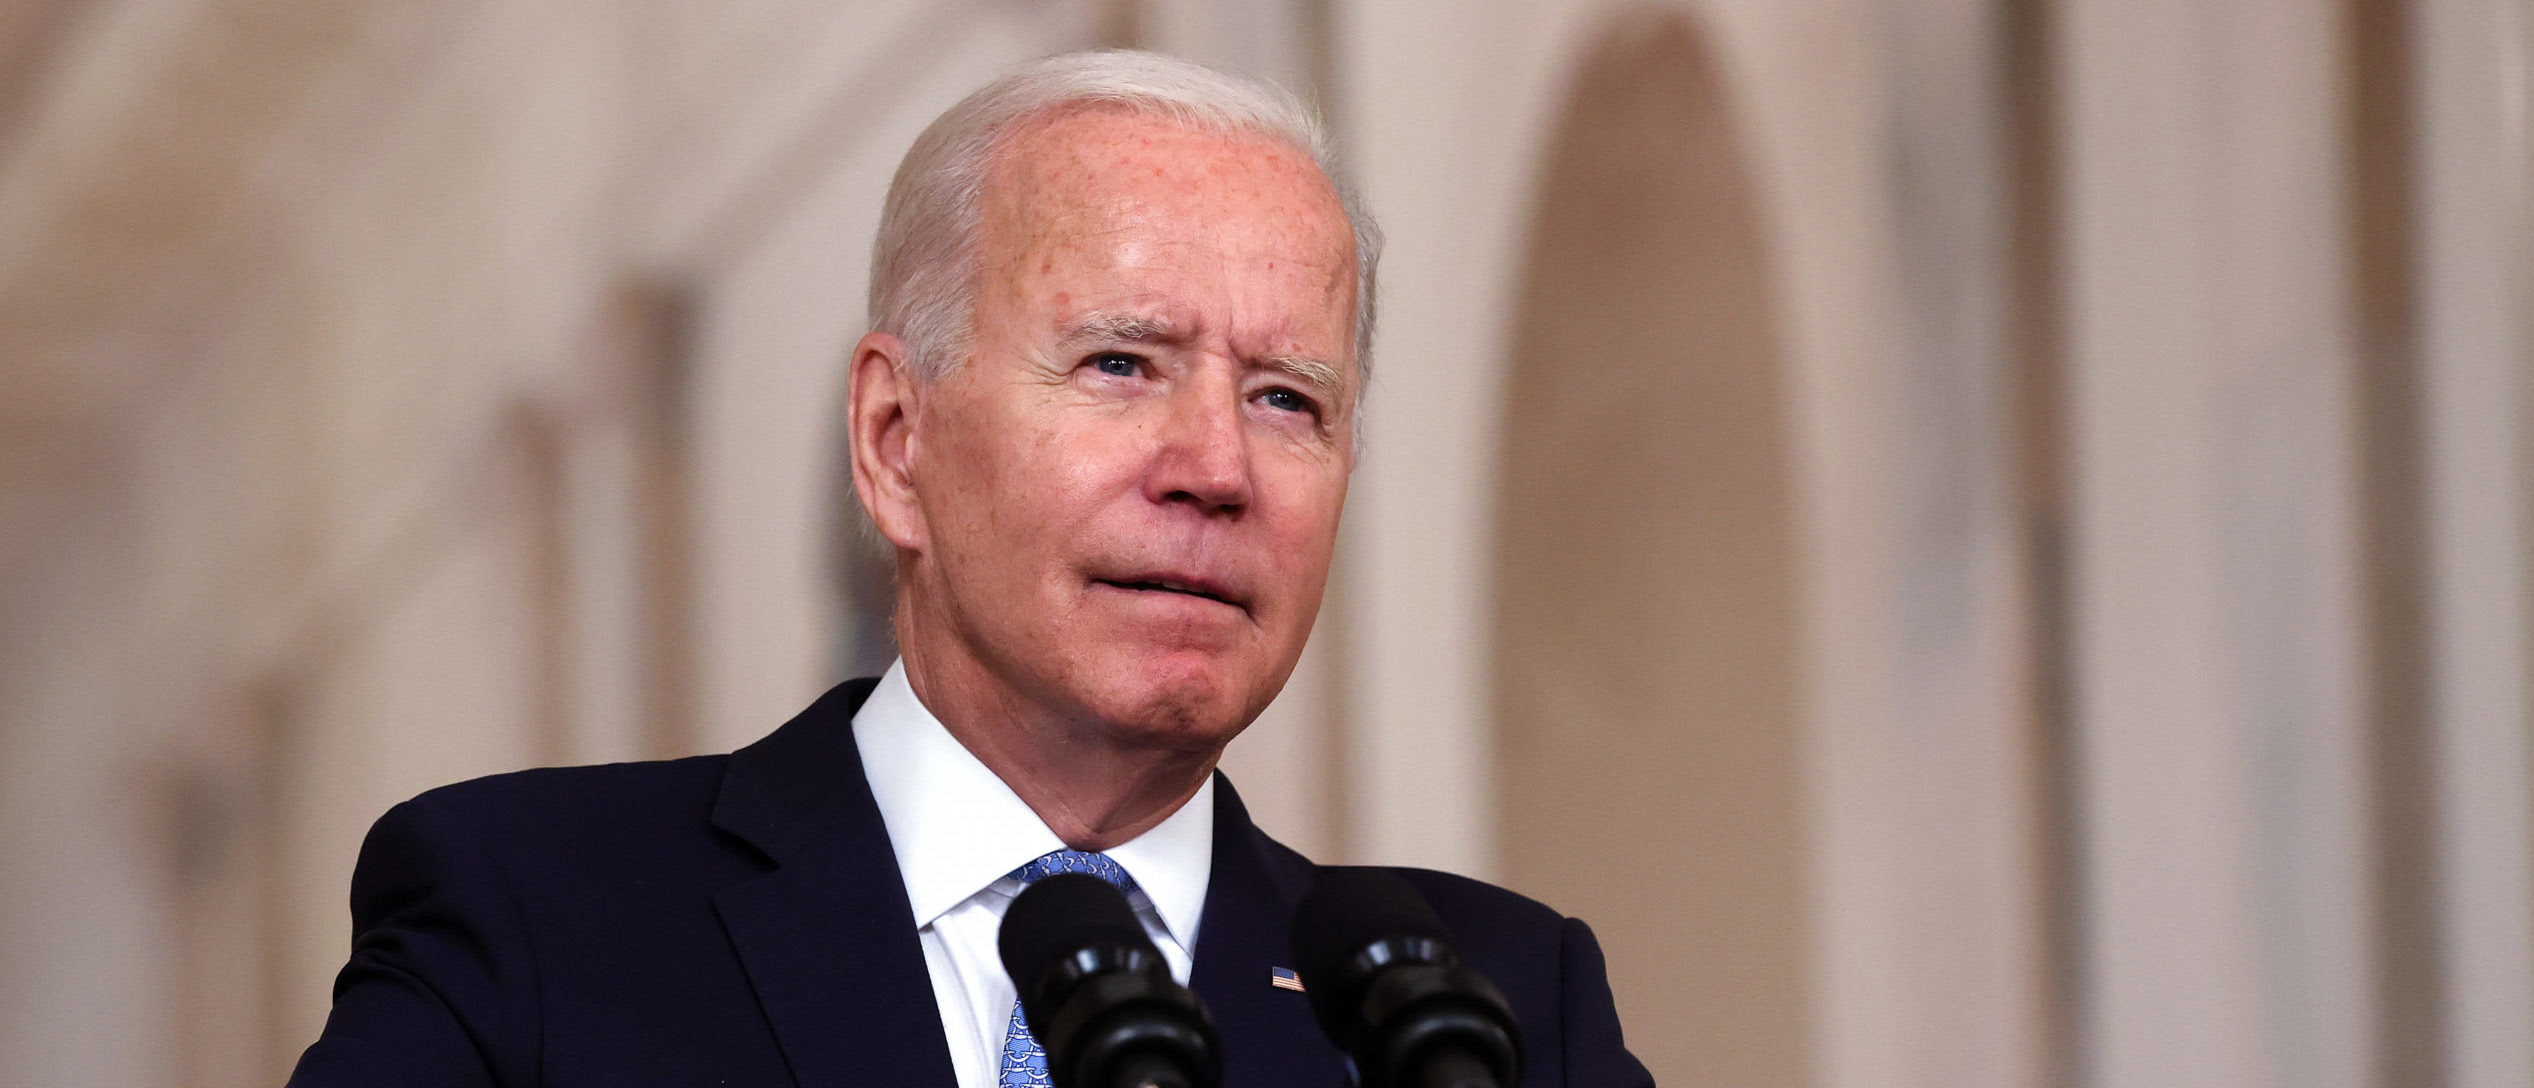 REPORT: Biden Orders 3,000 More US Troops To Poland As Russian Invasion Of Ukraine Appears Imminent